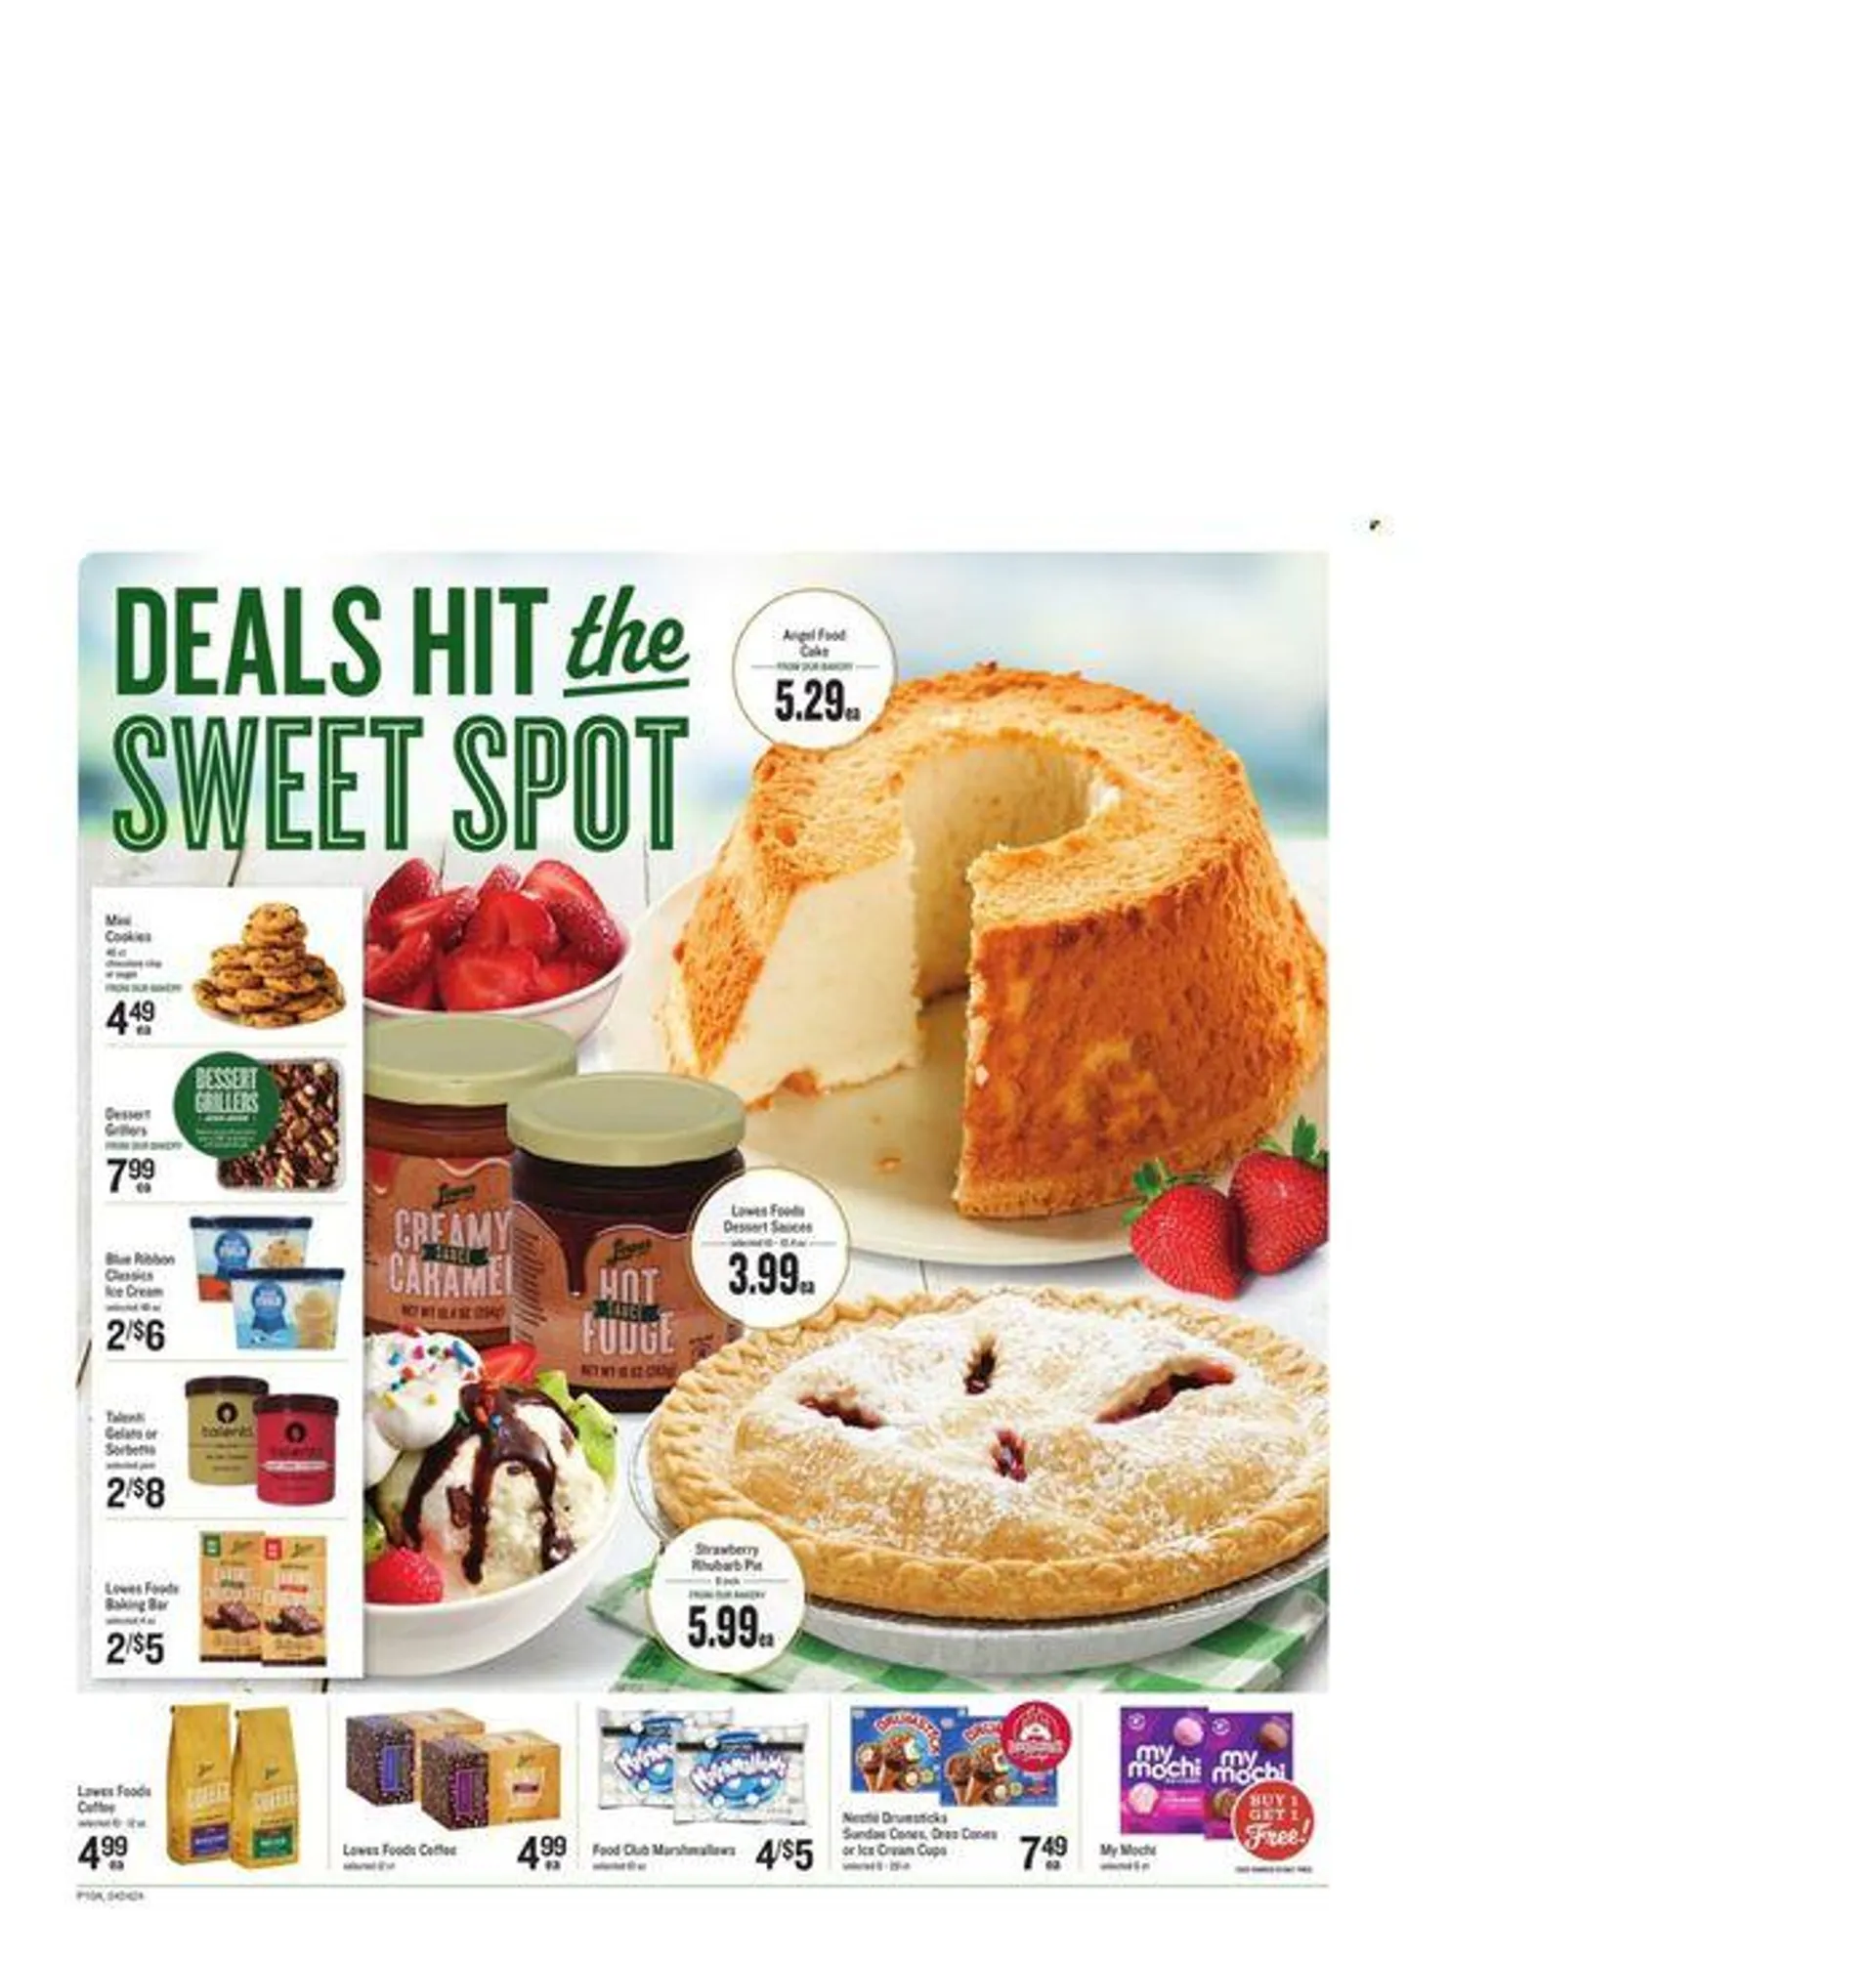 Lowes Foods Weekly ad - 17